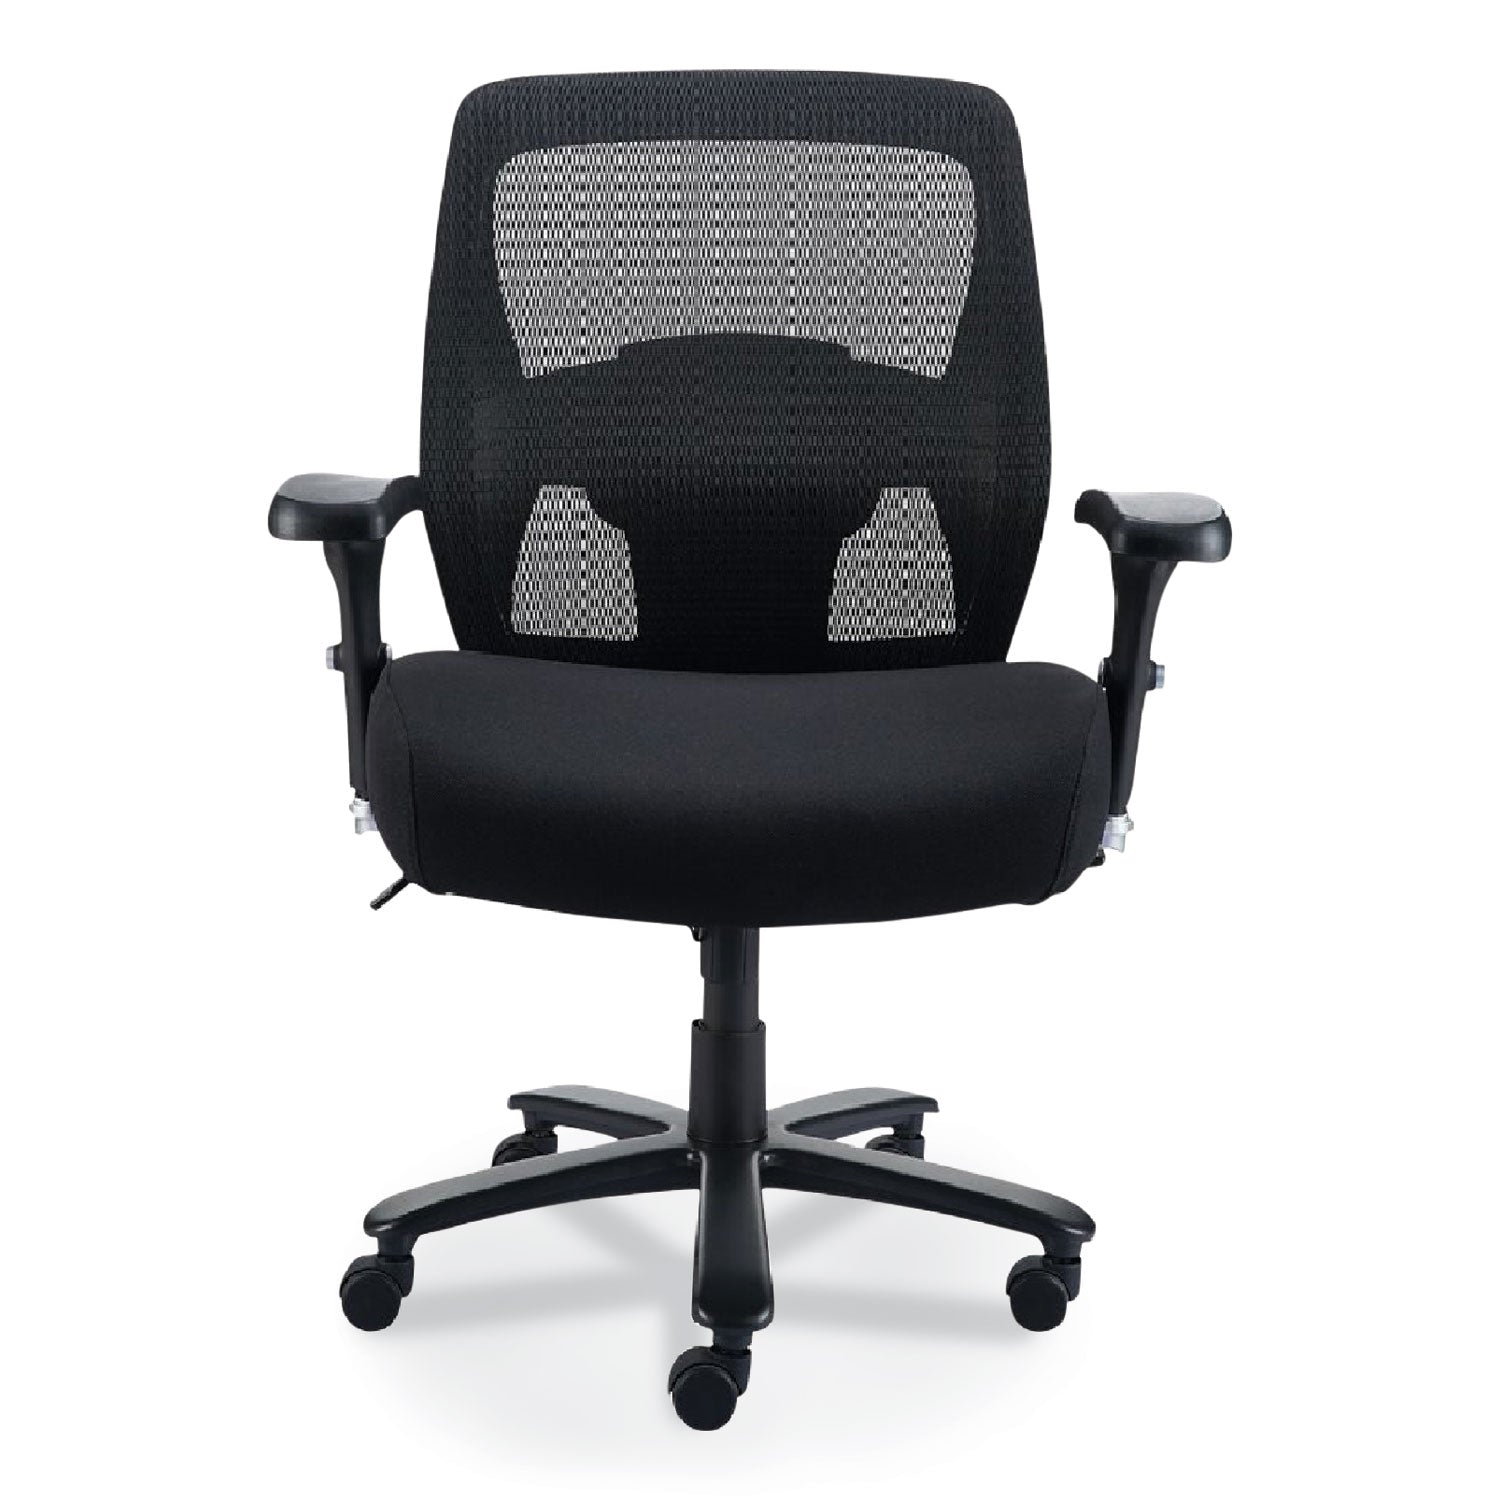 Alera Faseny Series Big and Tall Manager Chair, Supports Up to 400 lbs, 17.48" to 21.73" Seat Height, Black Seat/Back/Base - 1